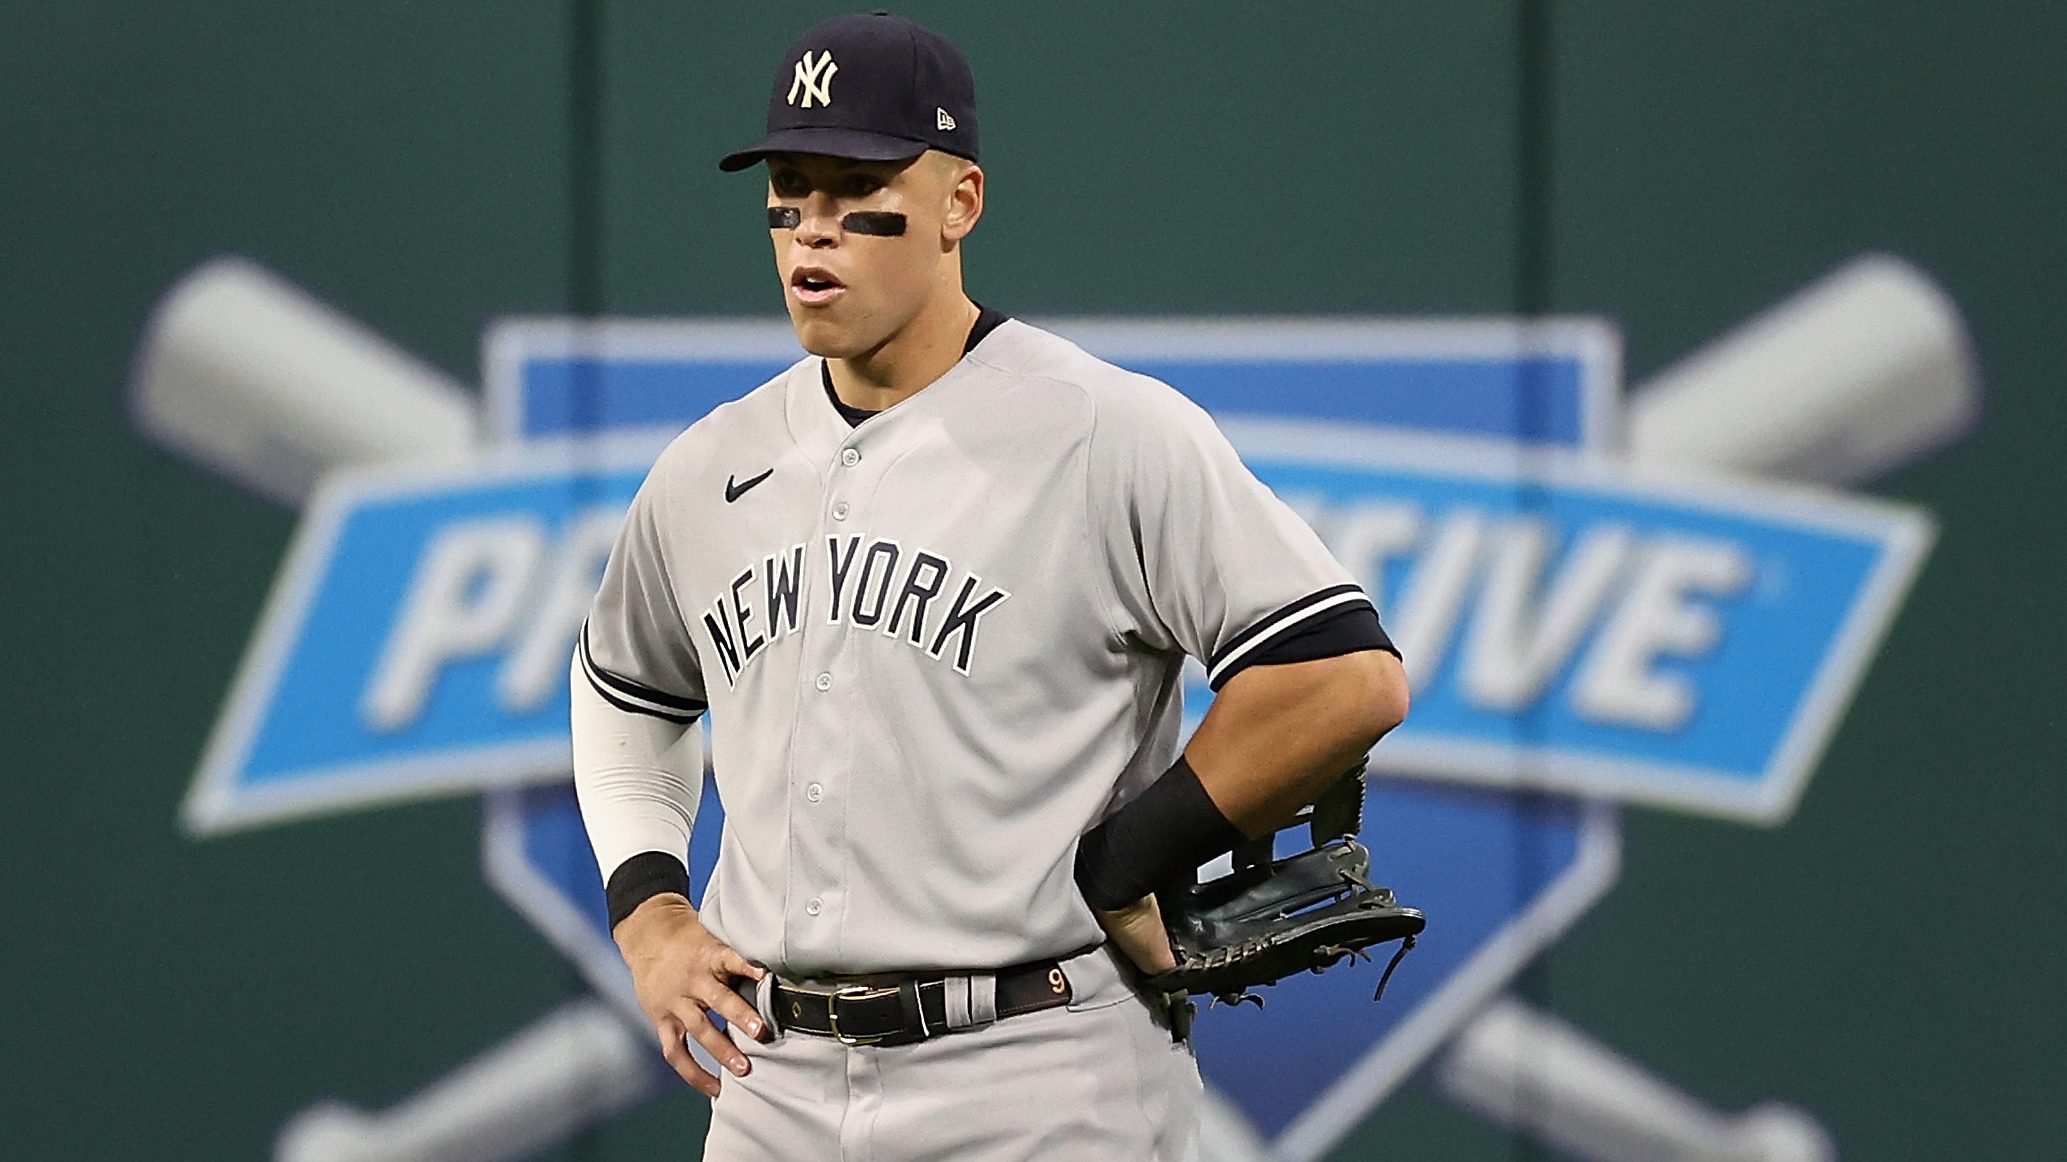 How to Watch New York Yankees Games Live in 2023